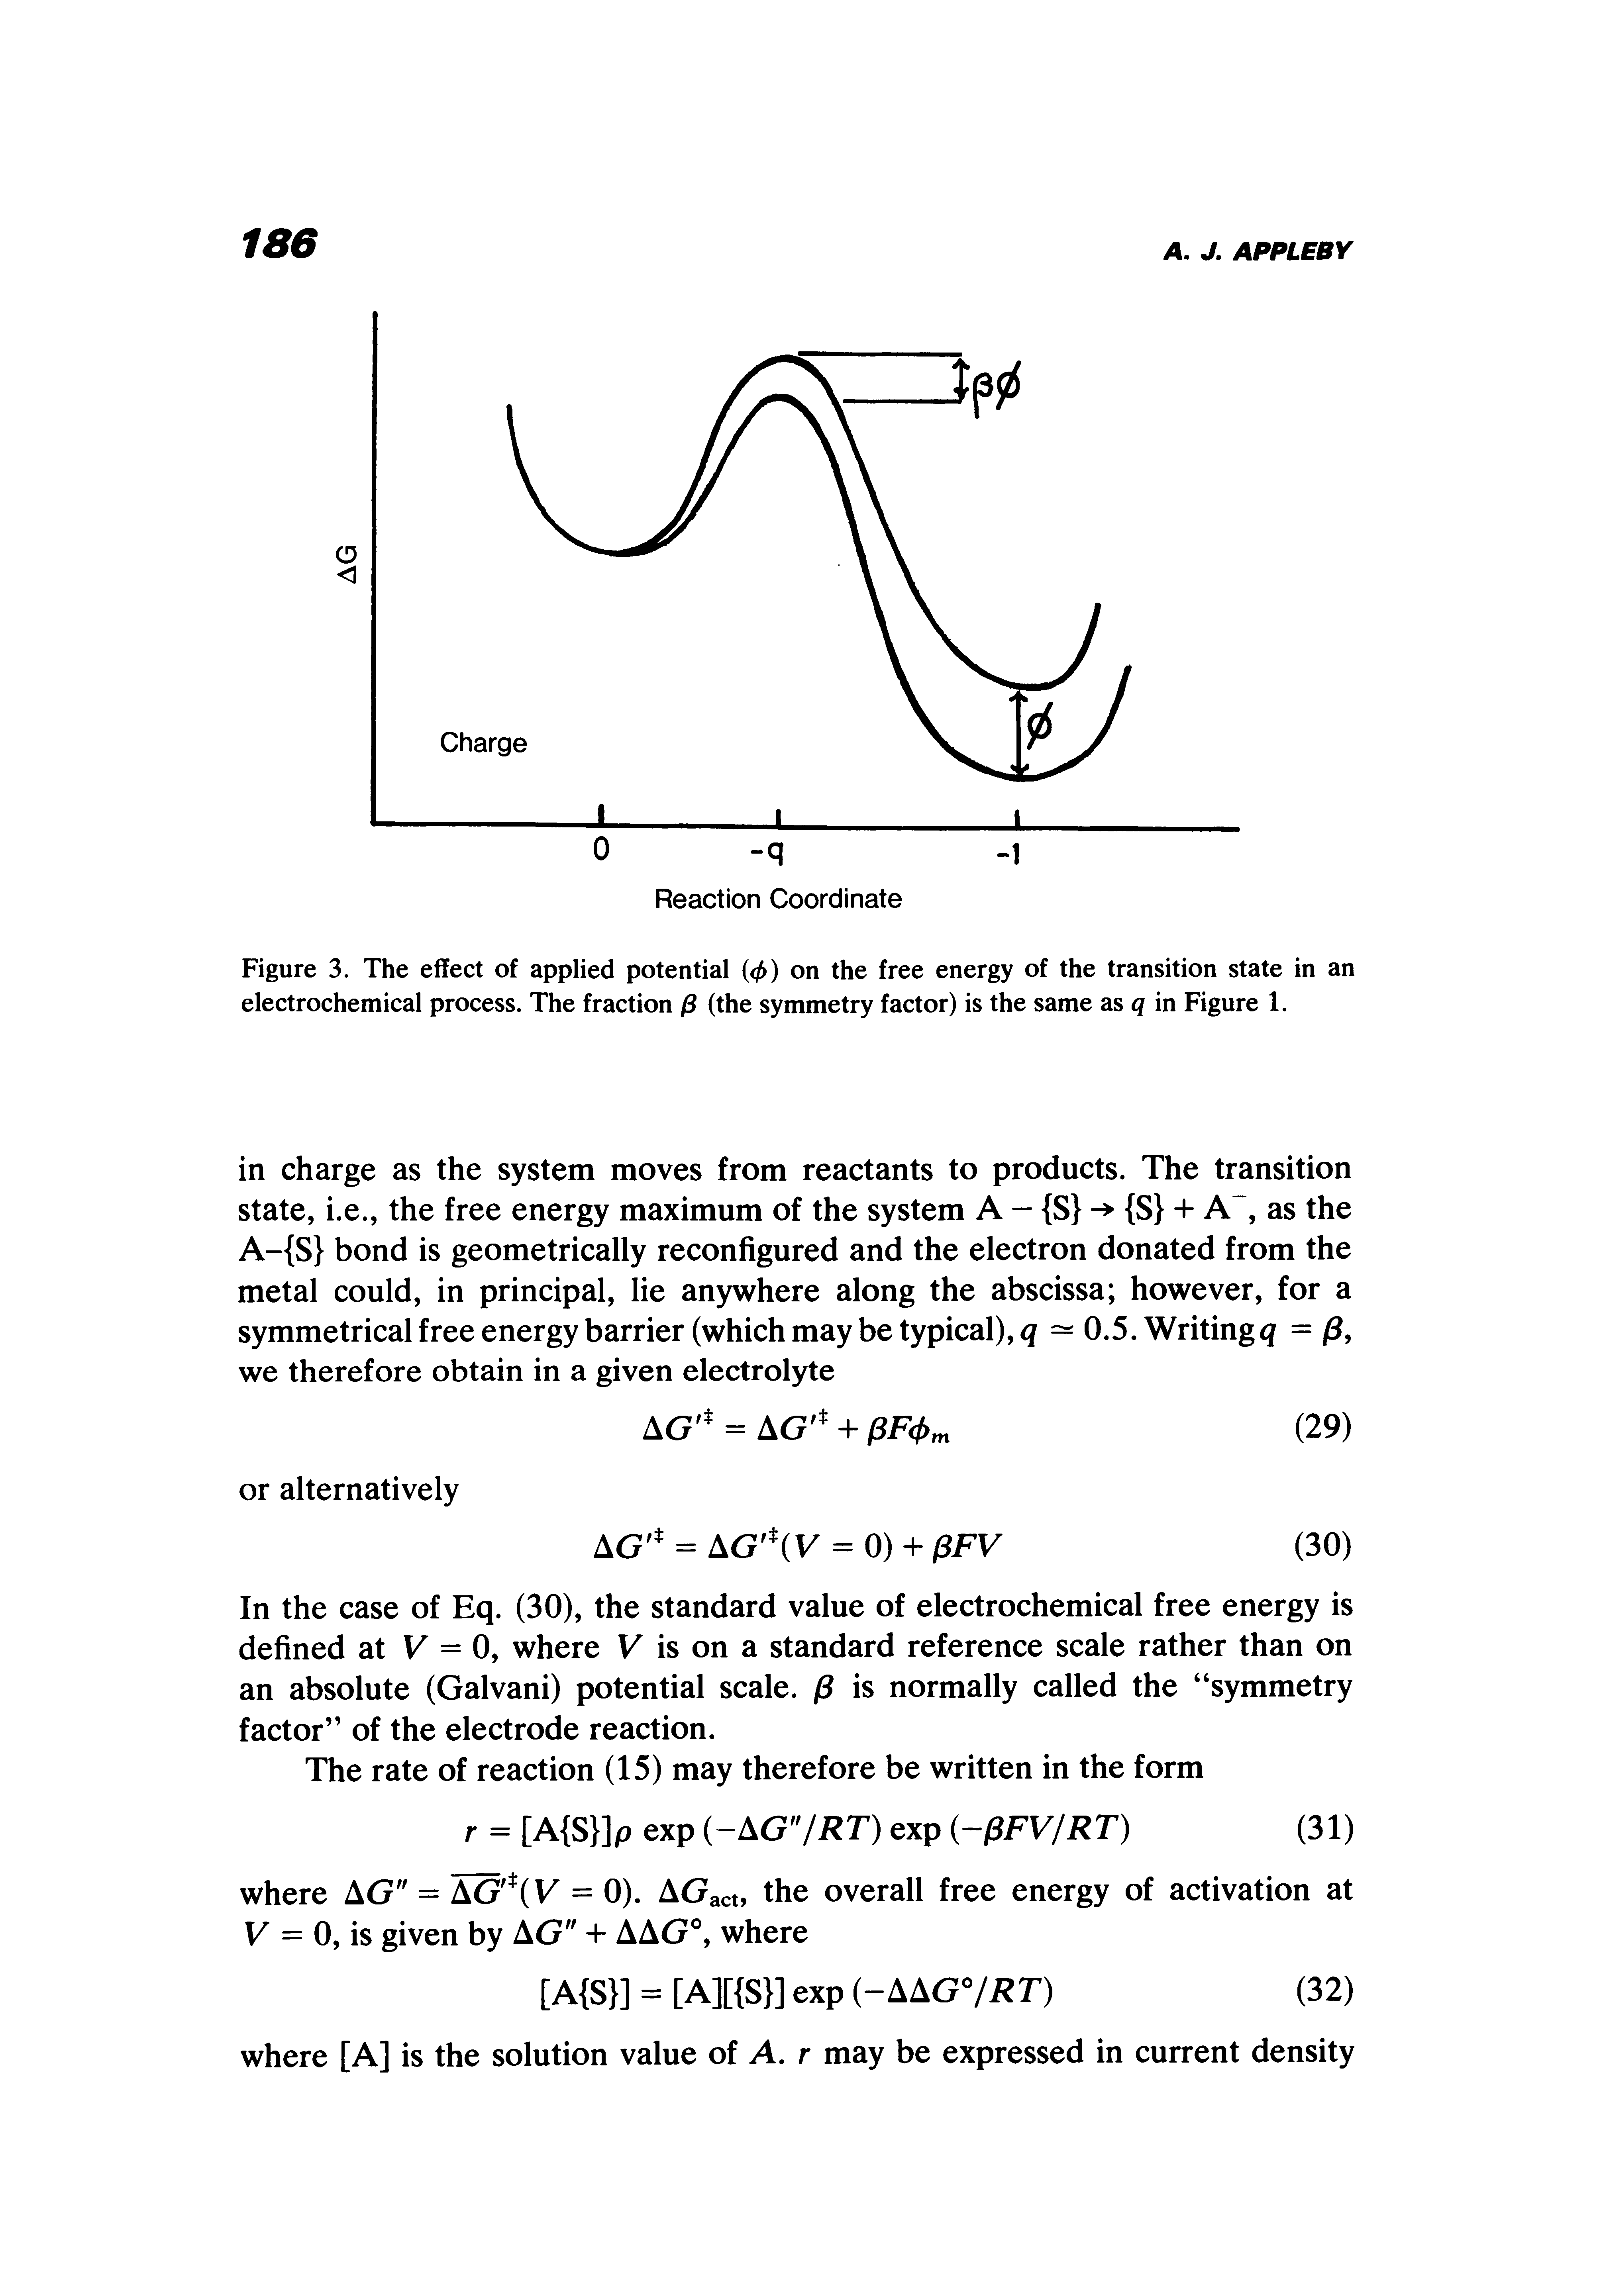 Figure 3. The effect of applied potential (< ) on the free energy of the transition state in an electrochemical process. The fraction /3 (the symmetry factor) is the same as q in Figure 1.